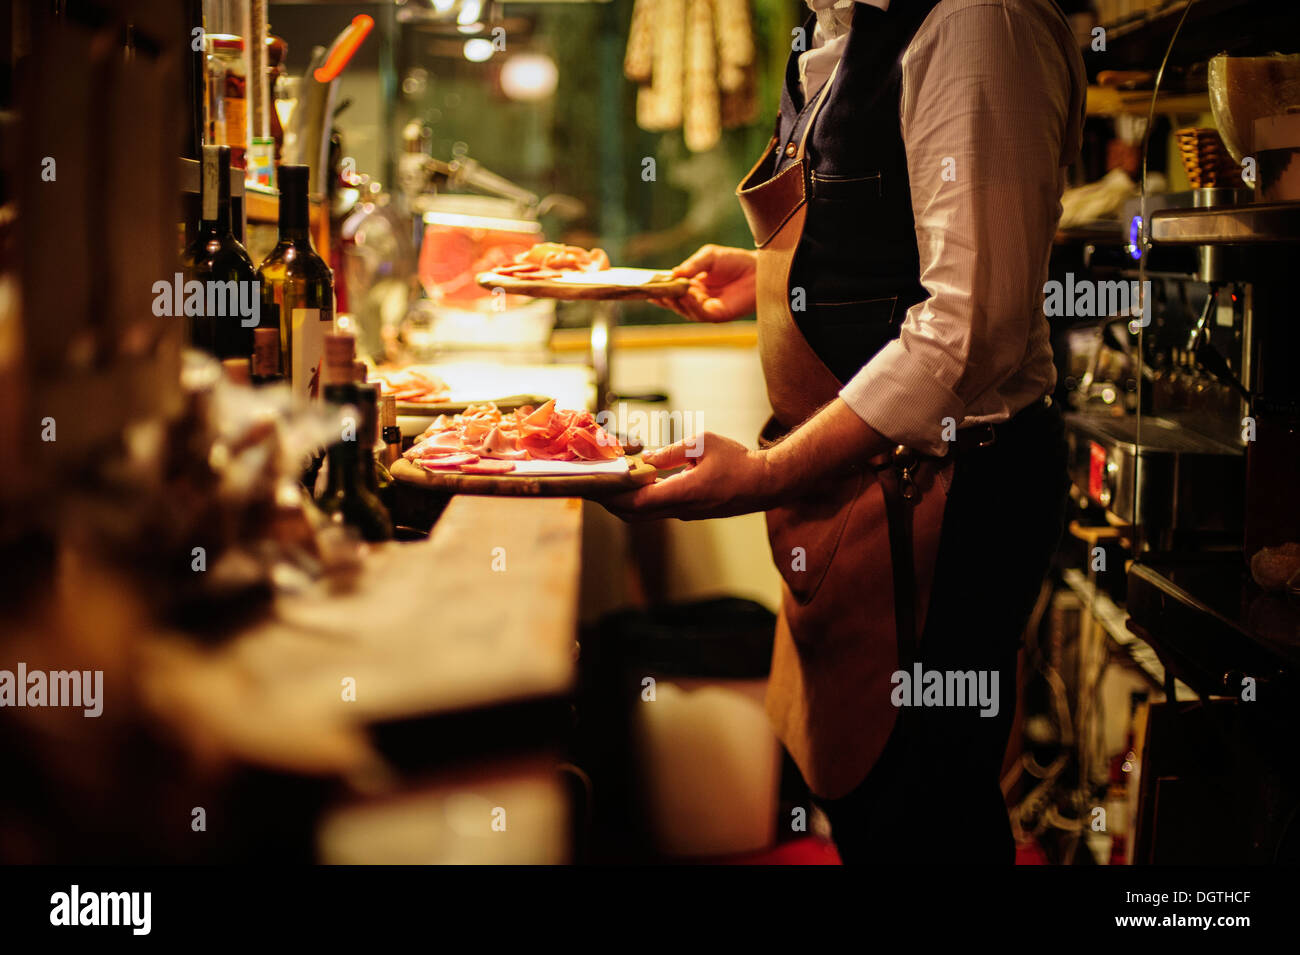 A server carrying a plater of dried meats at La Mascareta restaurant, Venice, Italy. Stock Photo